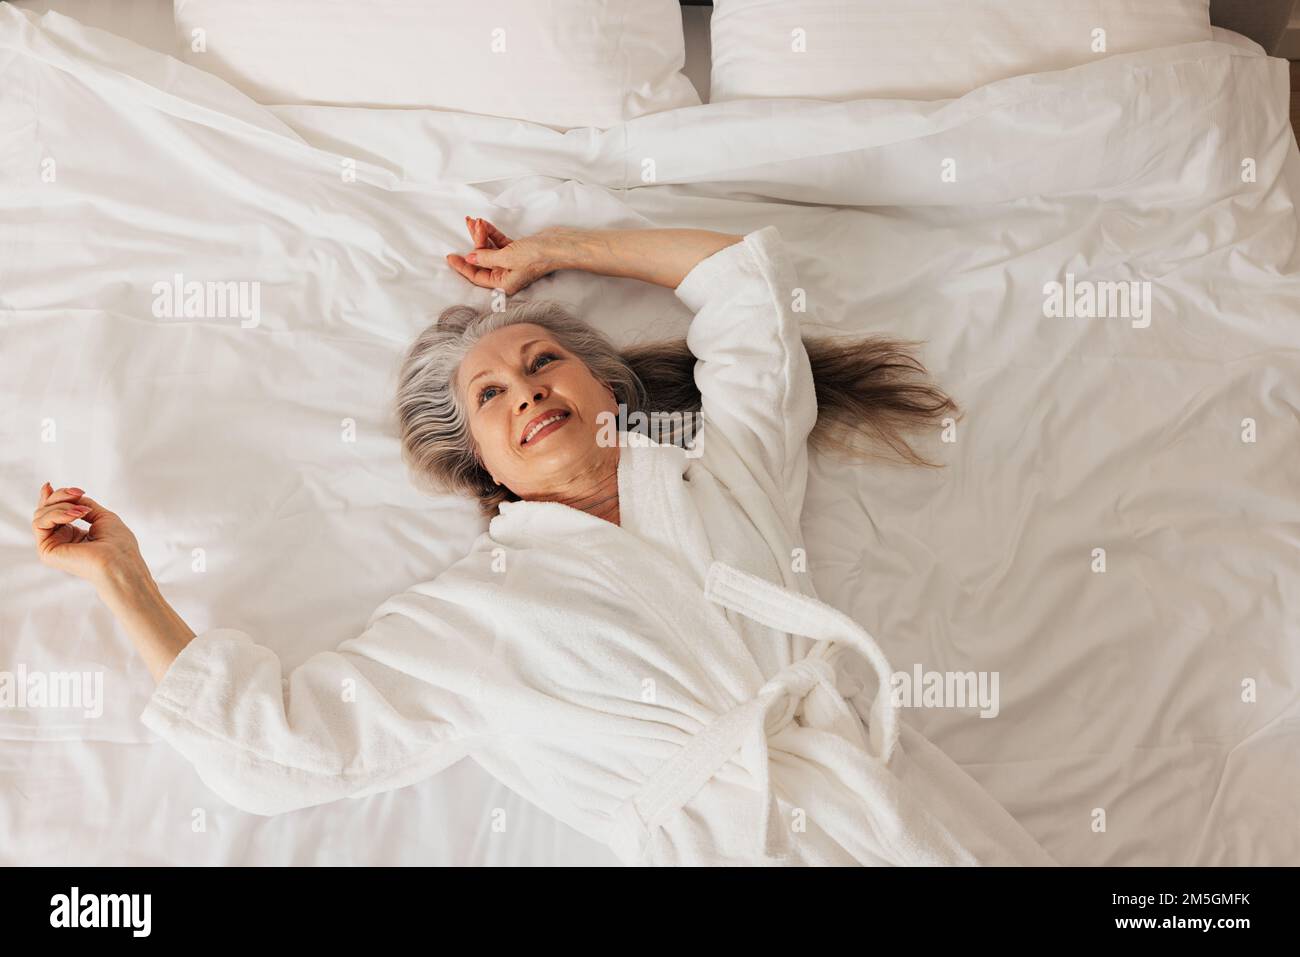 Senior woman in a bathrobe looking up while lying on a bed. Smiling retired female enjoying morning. Stock Photo